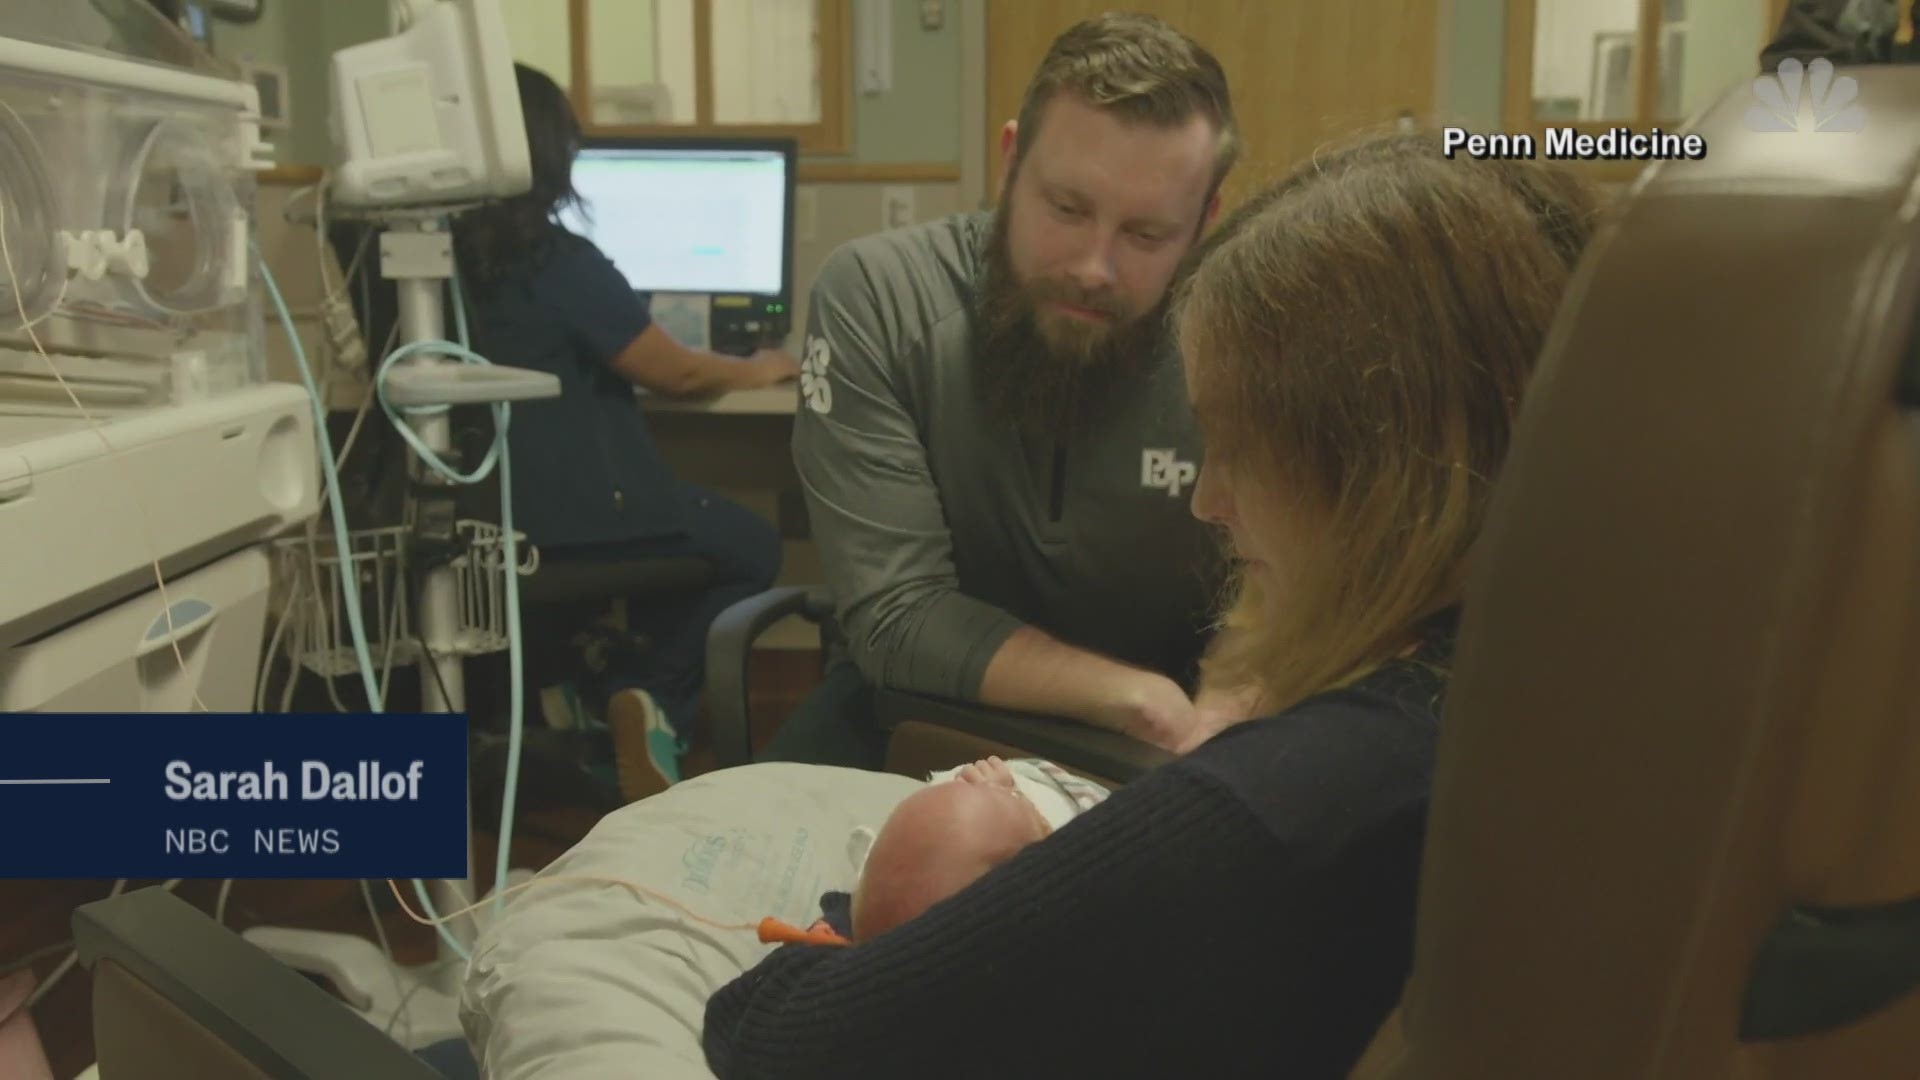 A Pennsylvania woman has become the second in the United States to deliver a baby from a womb transplanted from a deceased donor. NBC's Sarah Dallof reports.